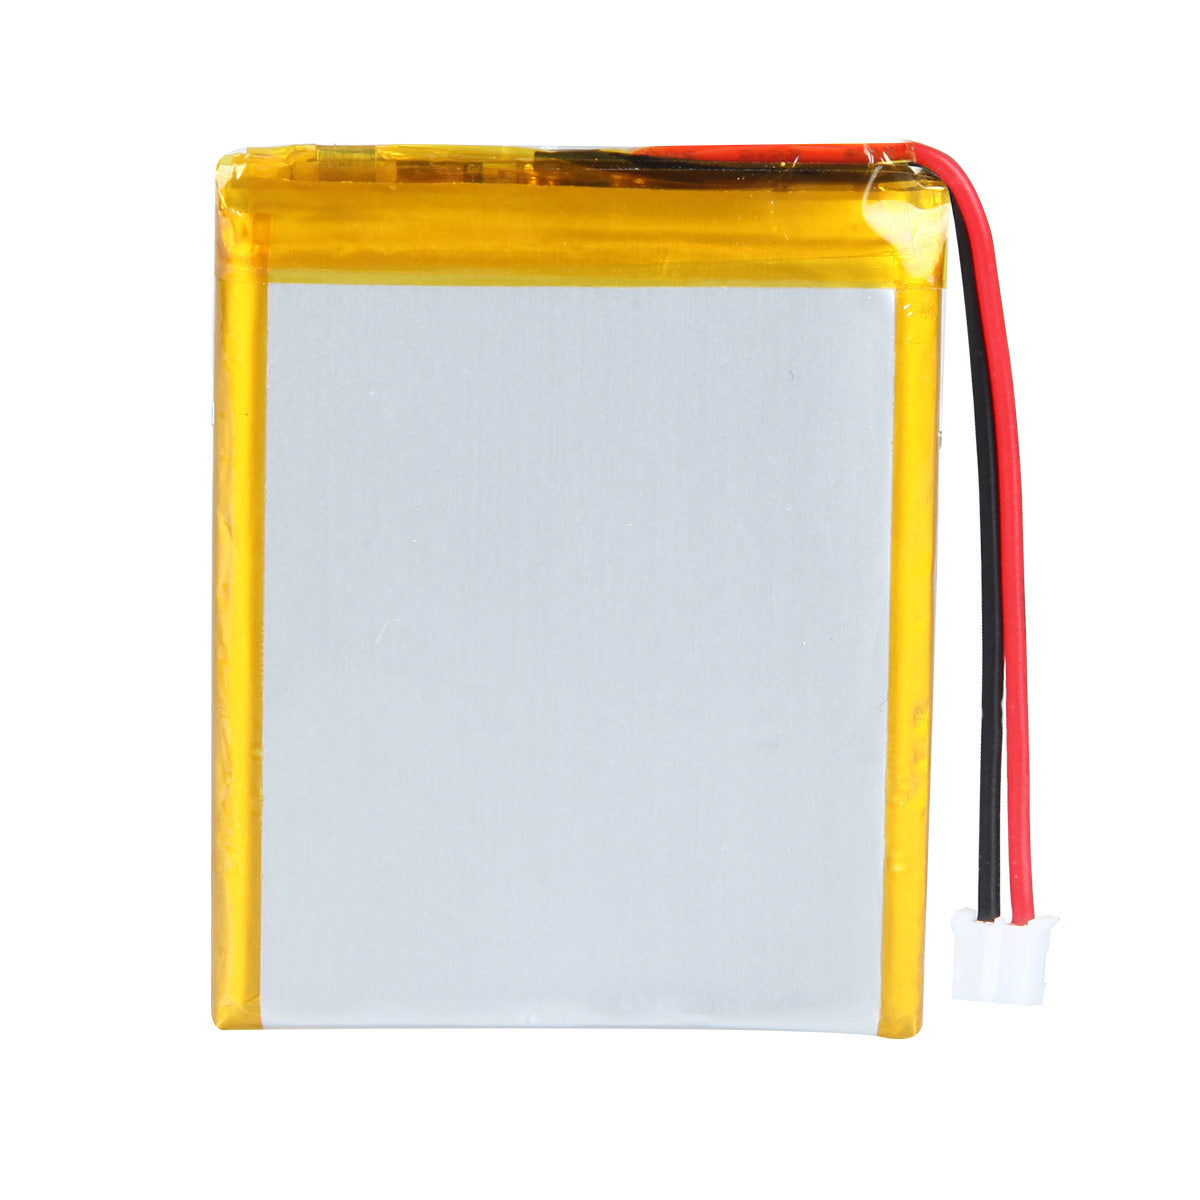 YDL 3.7V 1600mAh 505060 Rechargeable Lithium Polymer Battery Length 60mm